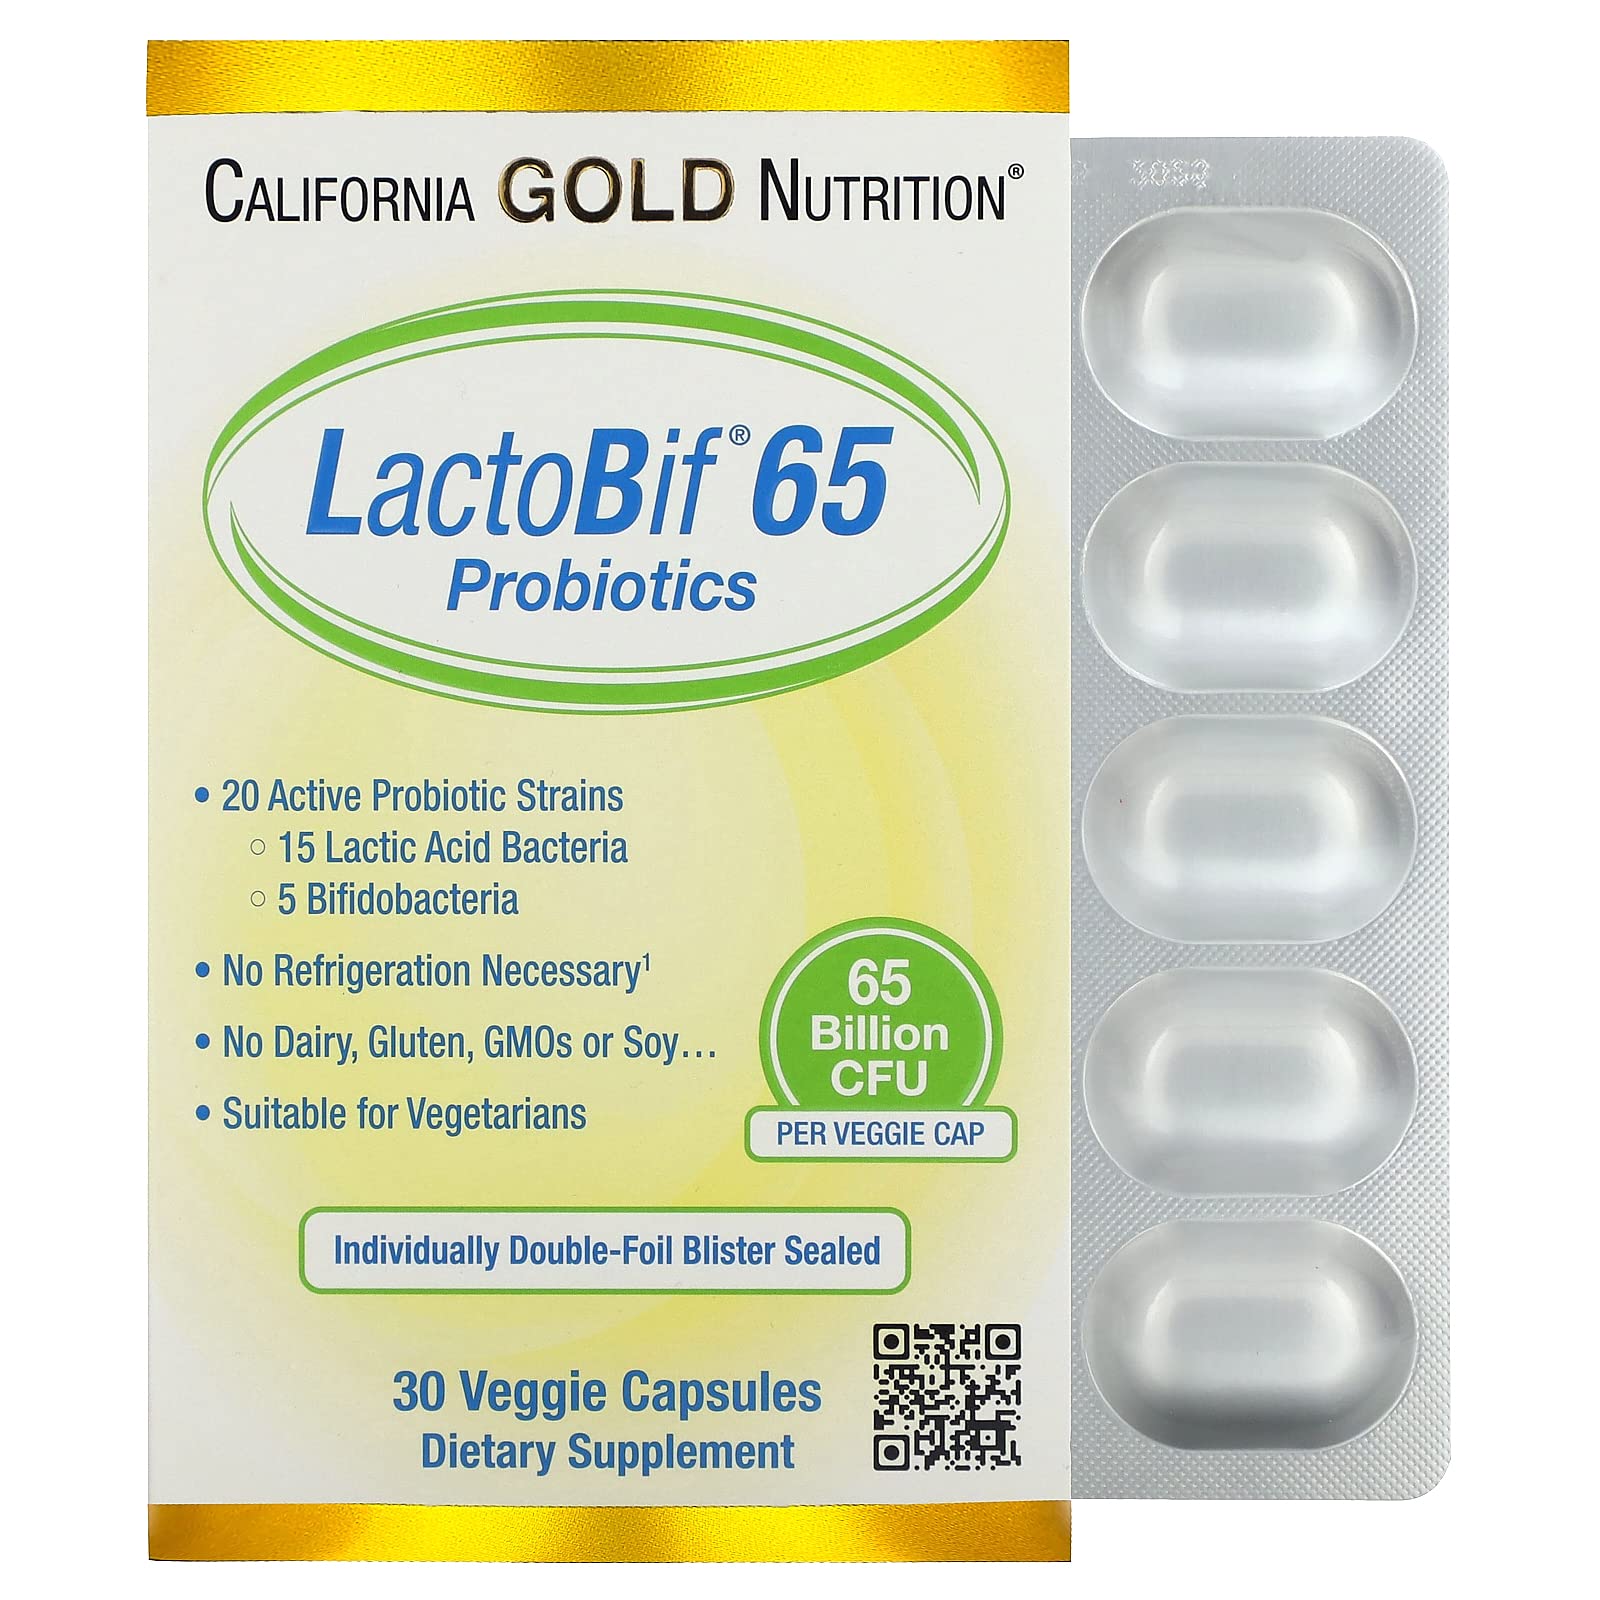 LactoBif Probiotics, 65 Bllion CFU, 20 Active & Clinically Researched Probiotic Strains, Soy-Free, Sugar-Free, Vegetarian, Individually Double-foil Blister Sealed, 30 Veggie Capsules